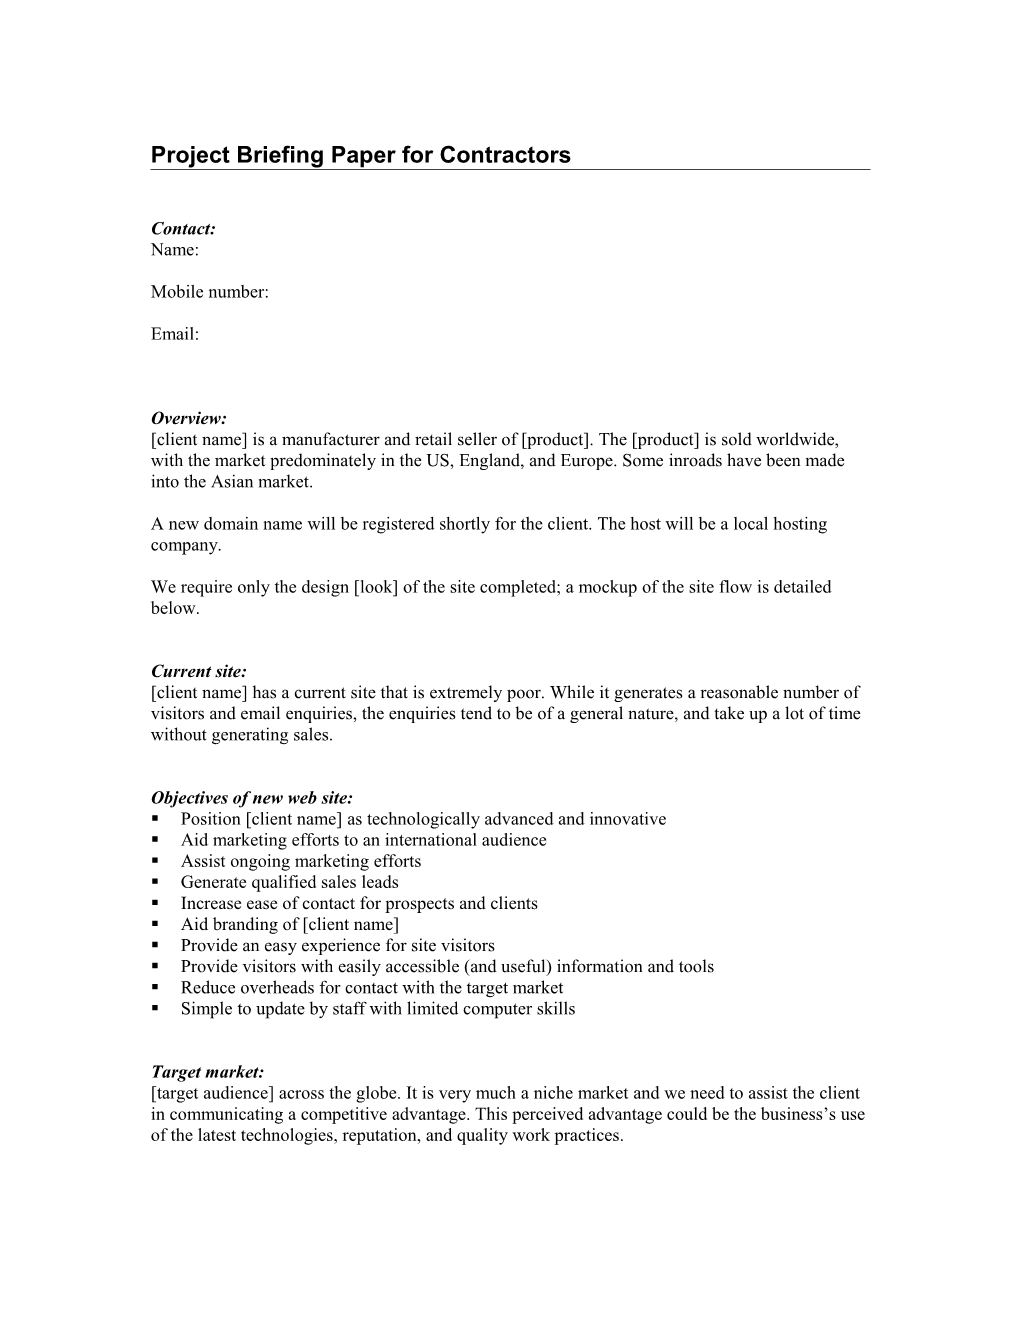 Project Briefing Paper for Contractors